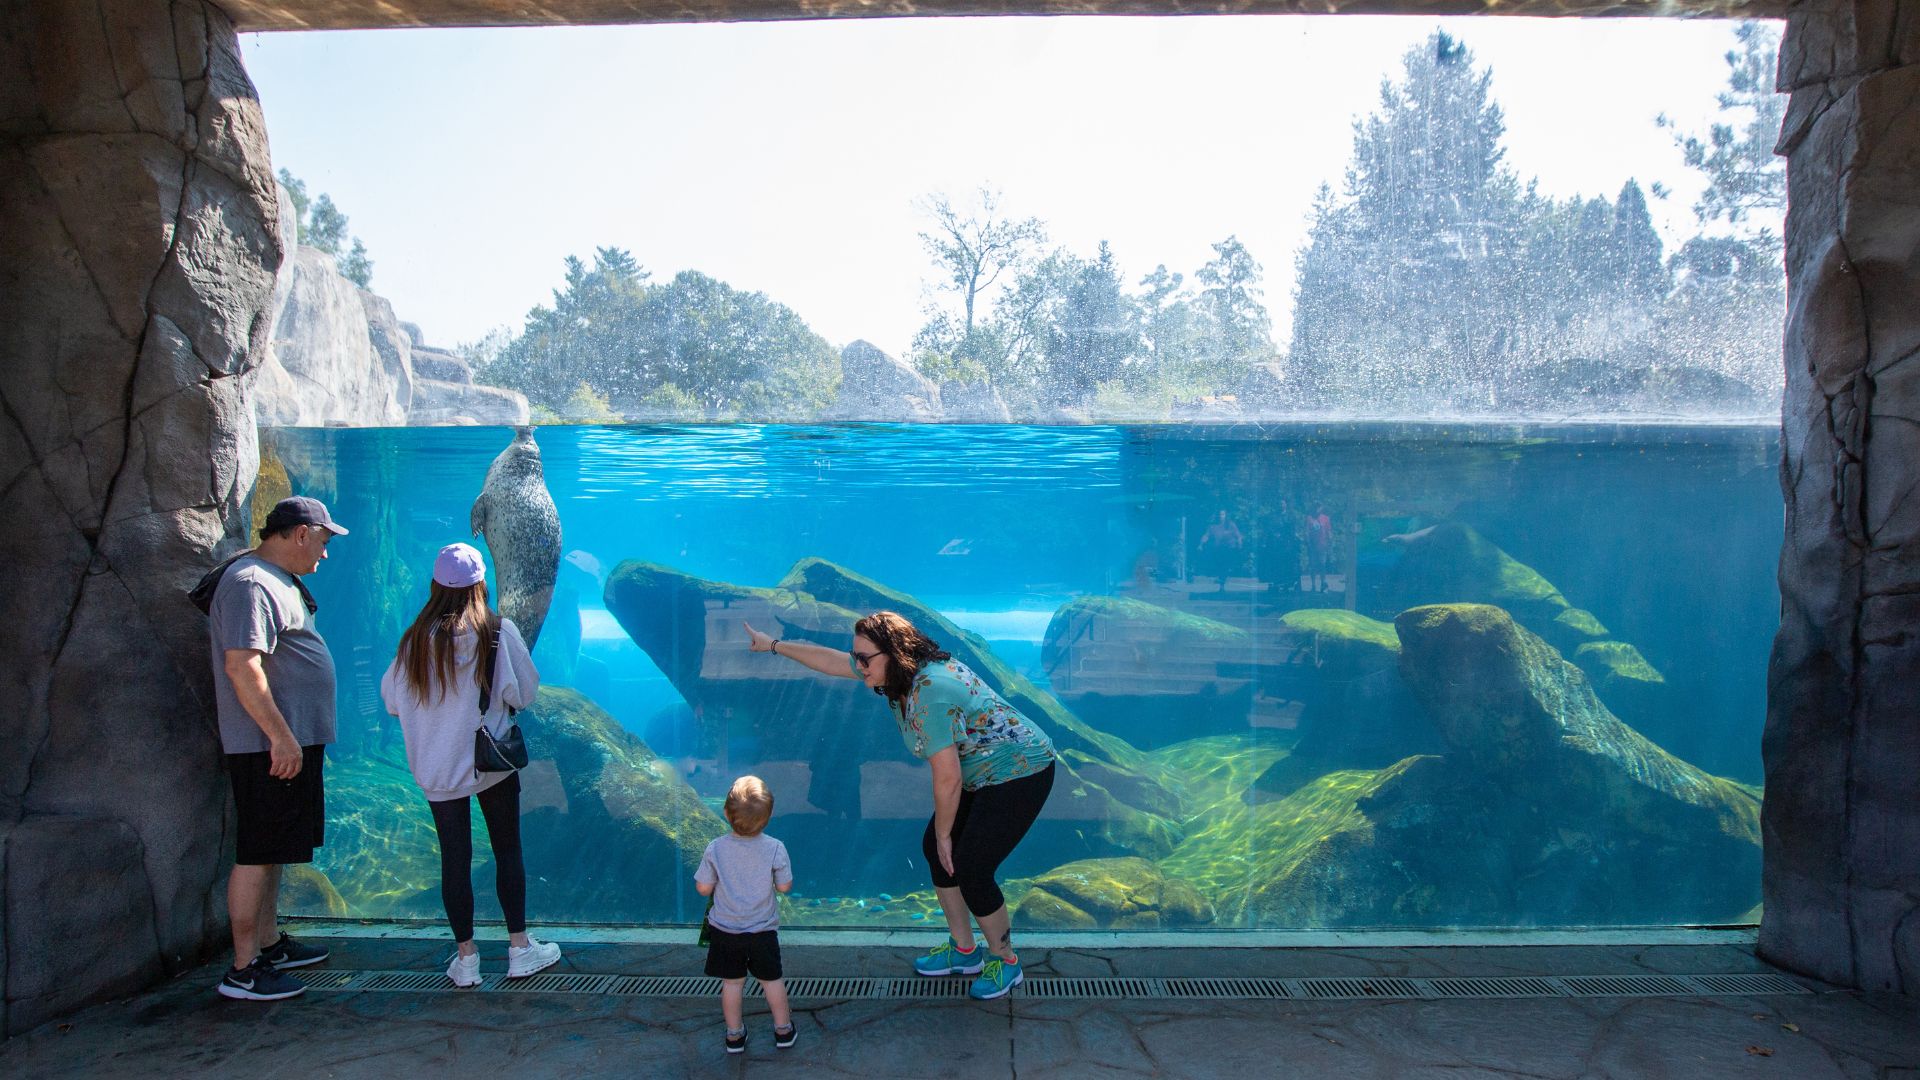 Families watch the sea lions and seals play at the Saint Louis Zoo.